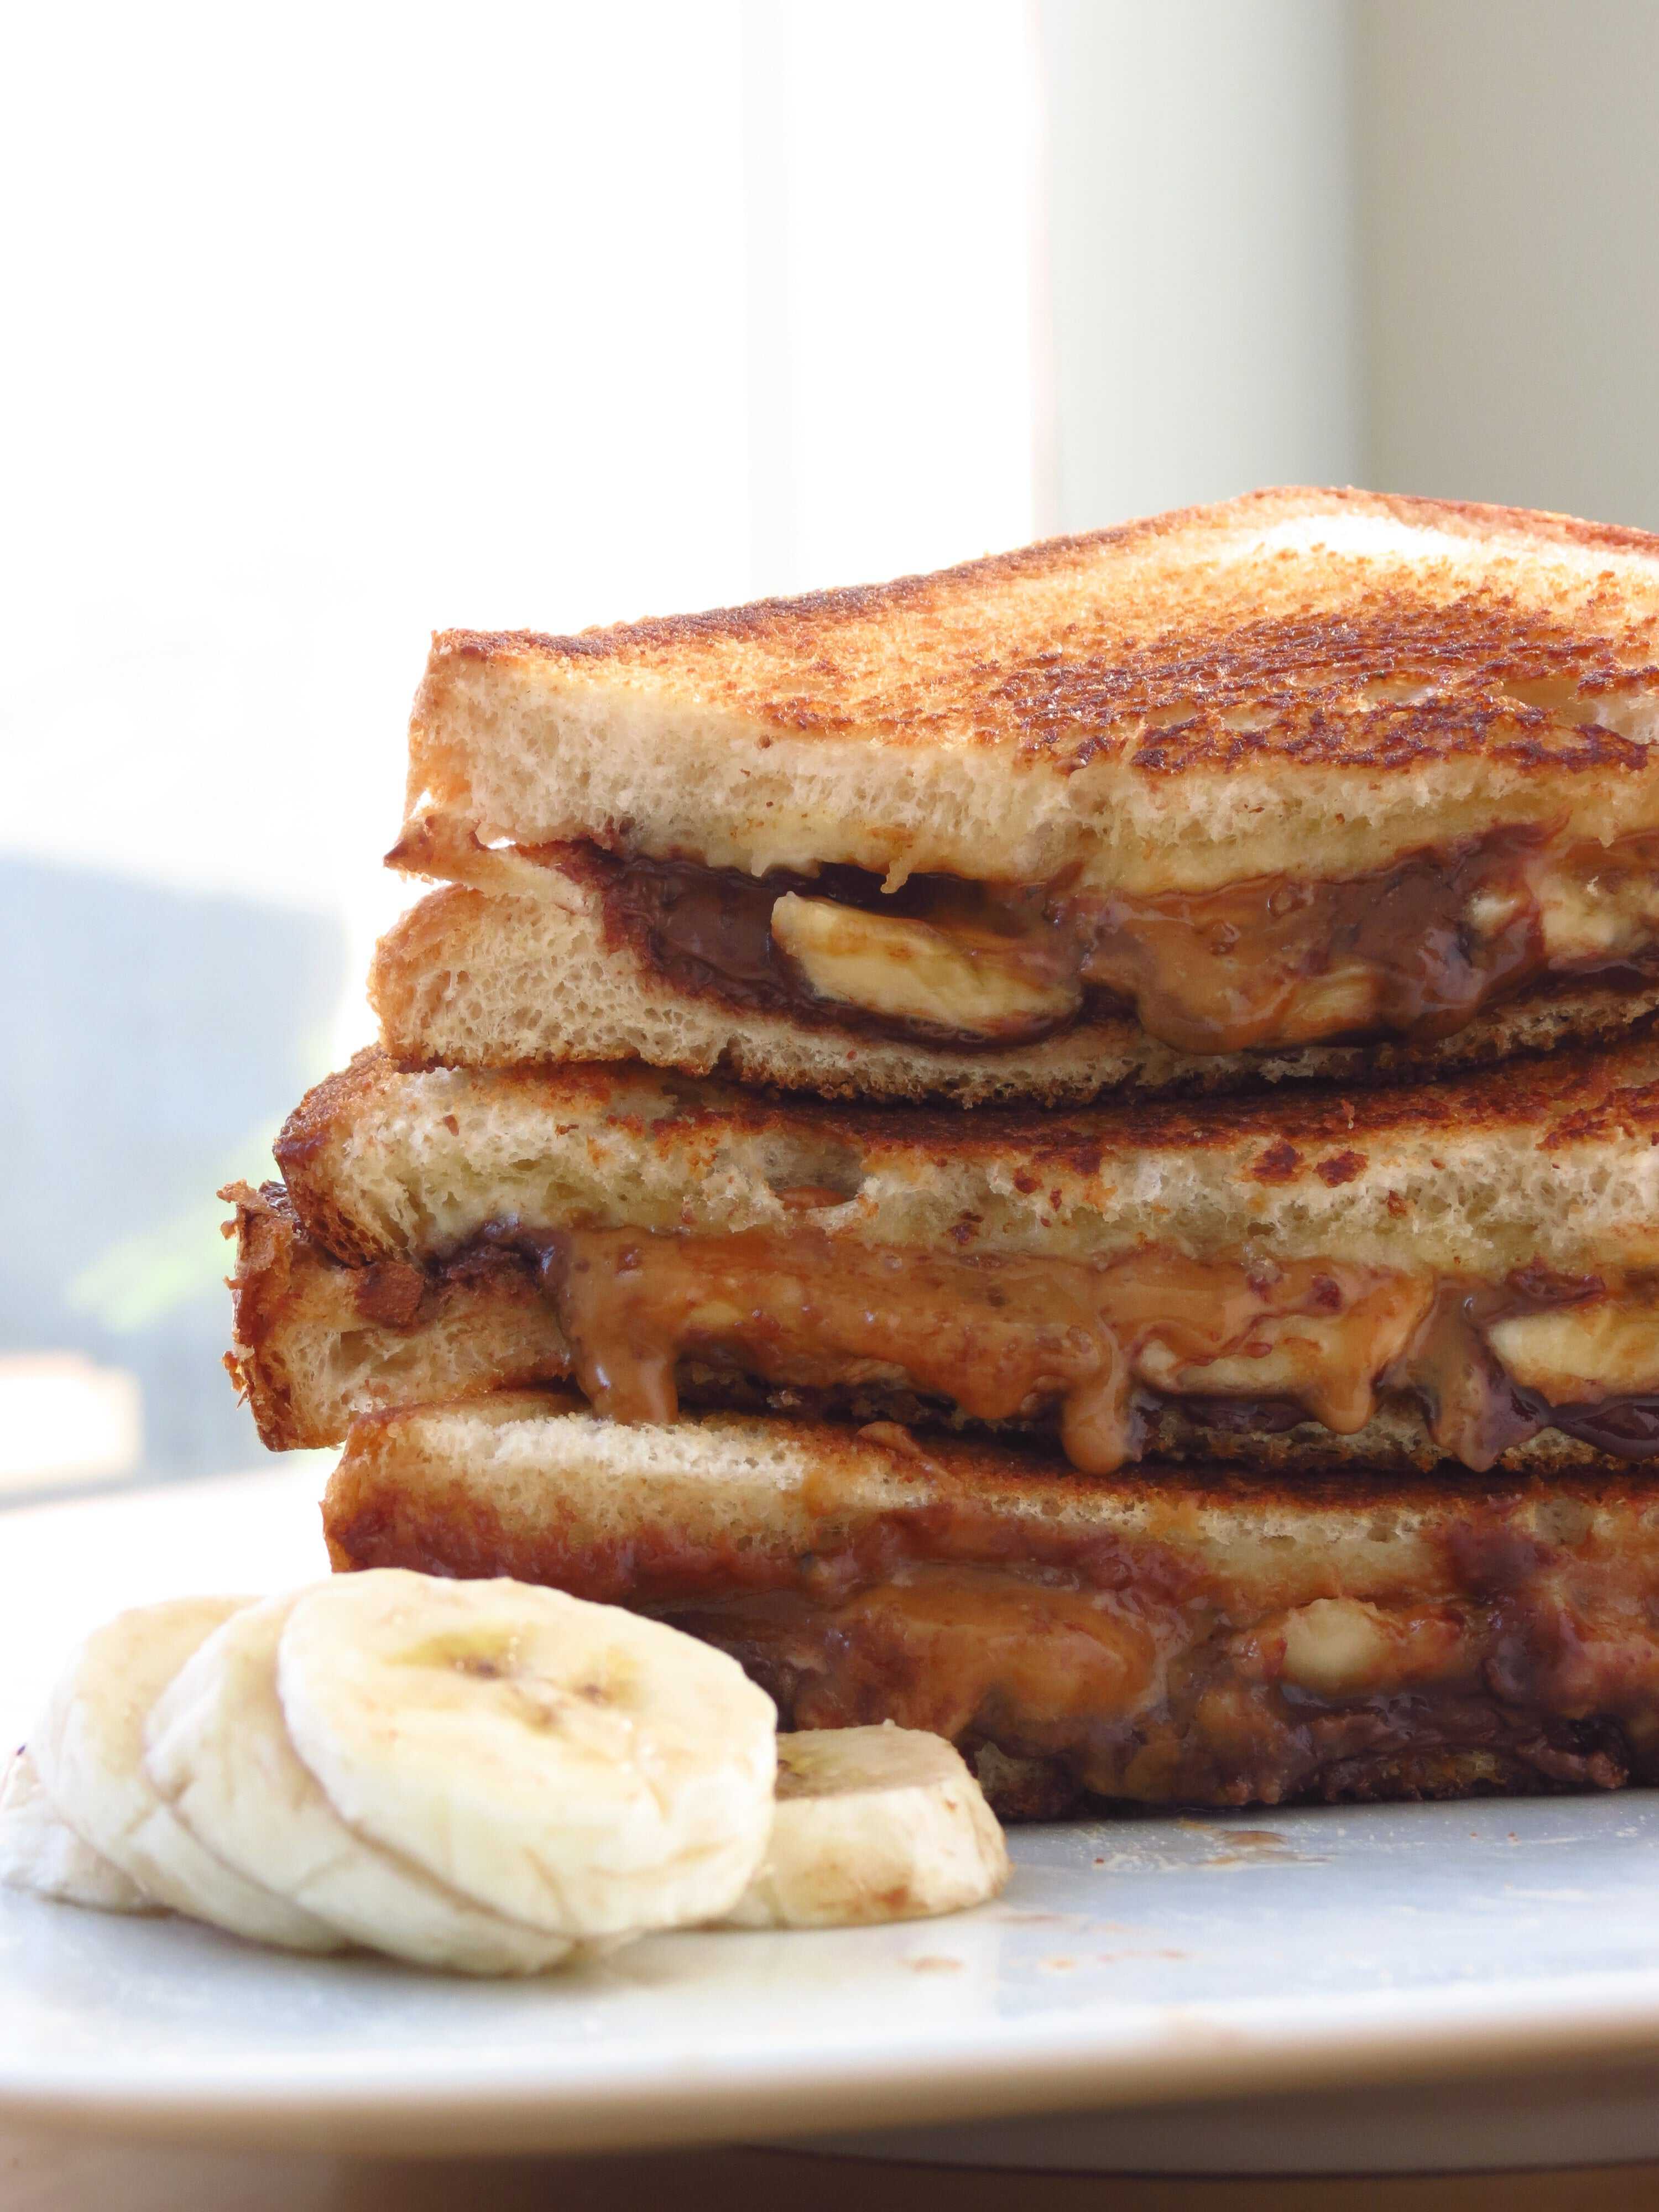 Nutella Cookie Butter Banana Grilled Cheese